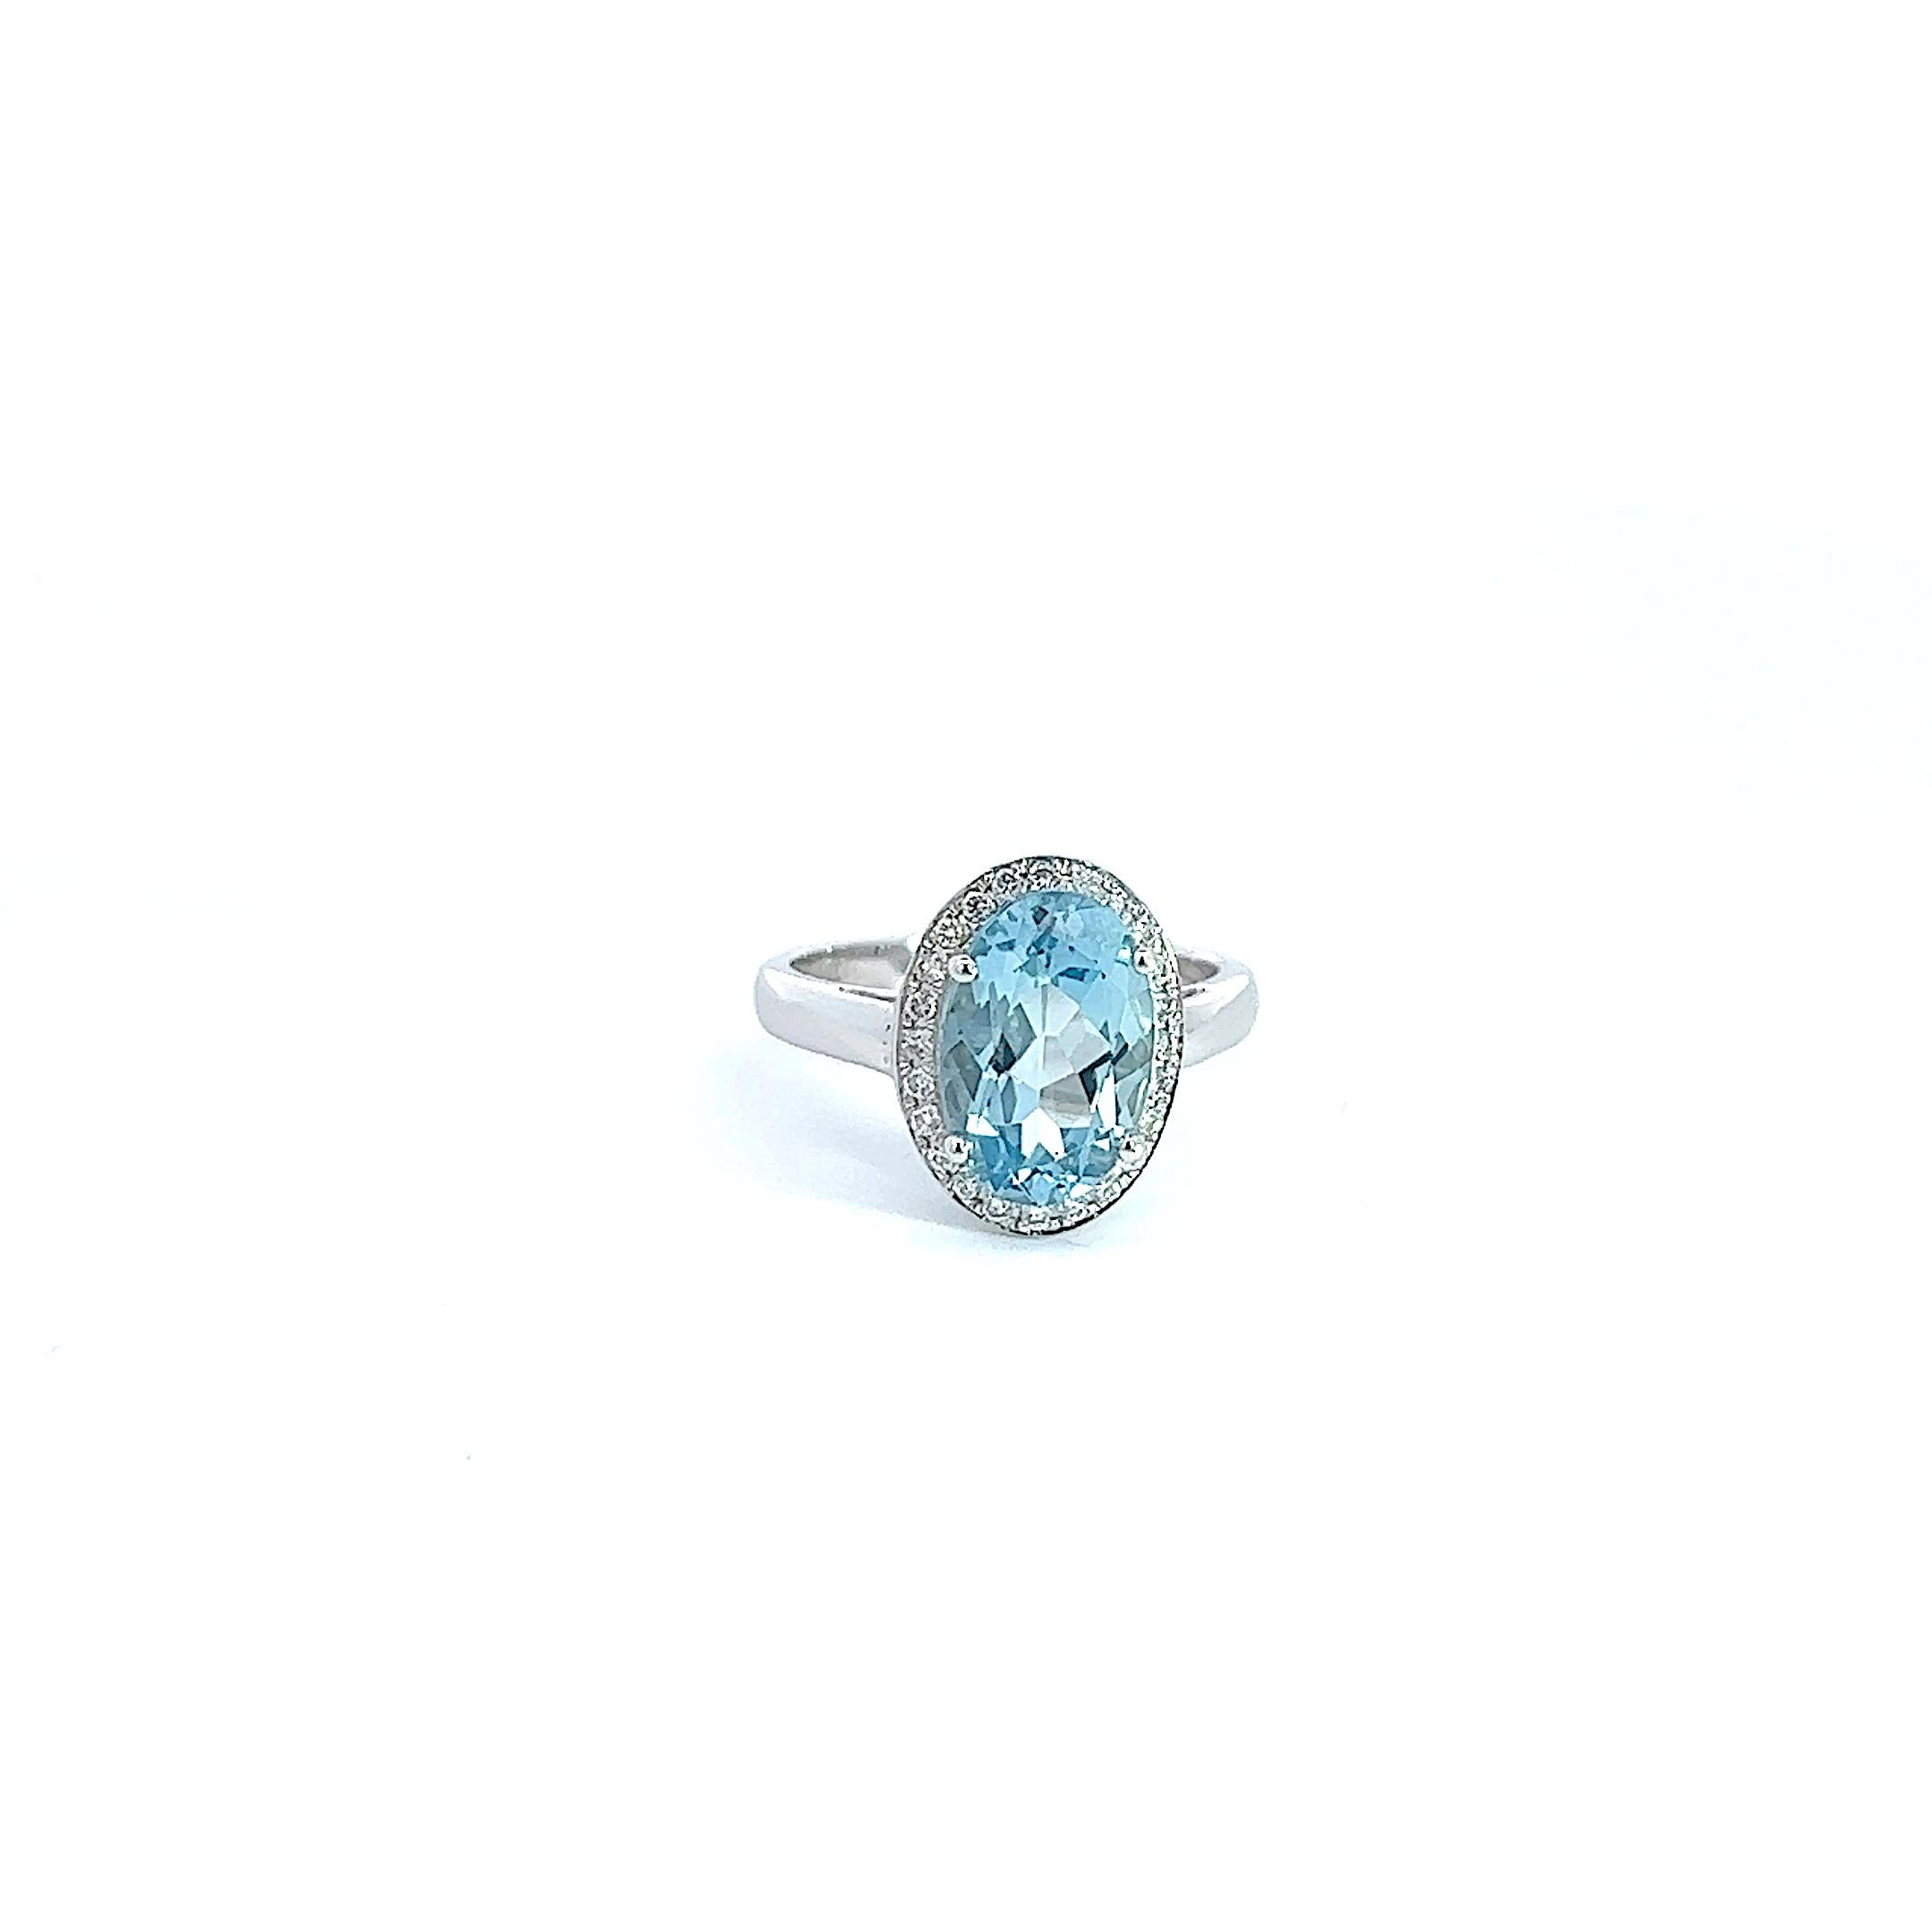 Contemporary Georgios Collections 18 Karat White Gold Aquamarine Ring with Diamond Bezel For Sale